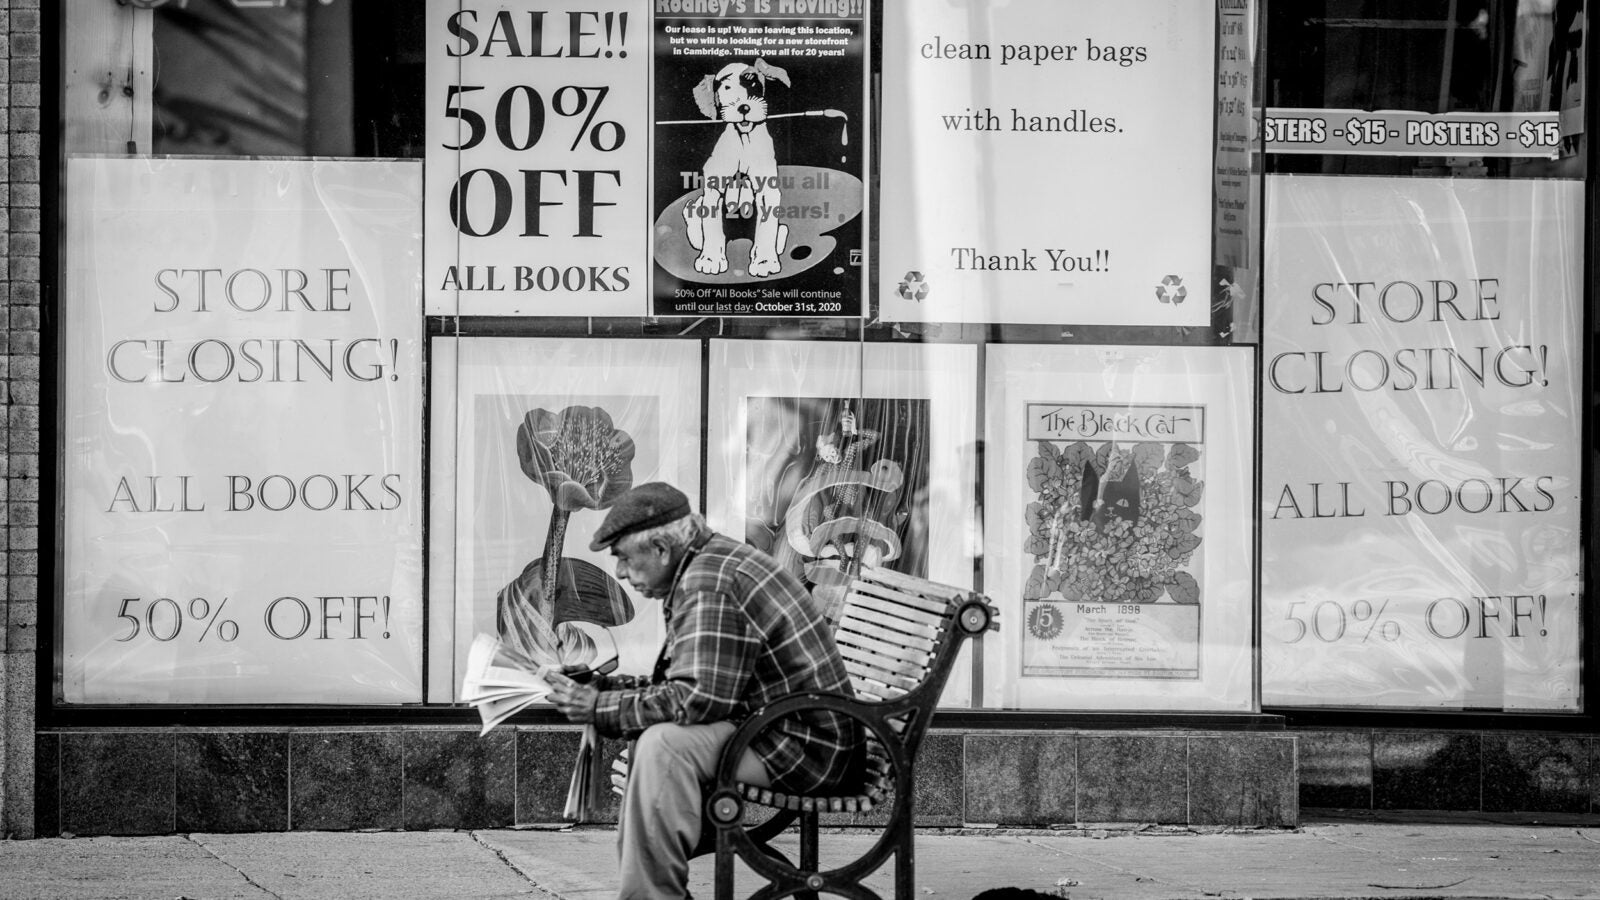 Man sitting on bench in front of store that is closing.